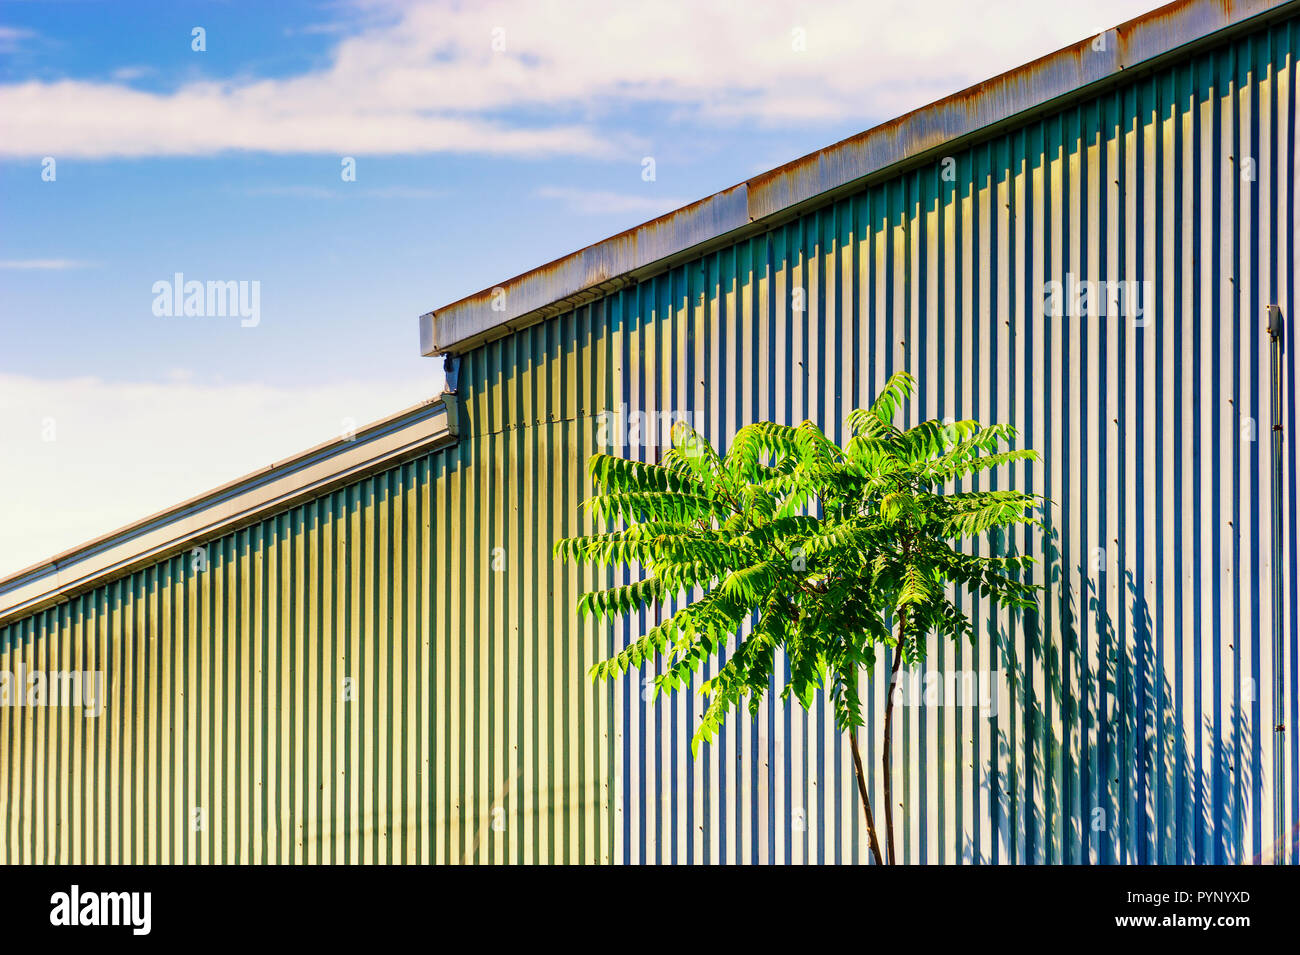 A lone tree stands against a corrugated metal shed under blue skies with white clouds. Stock Photo